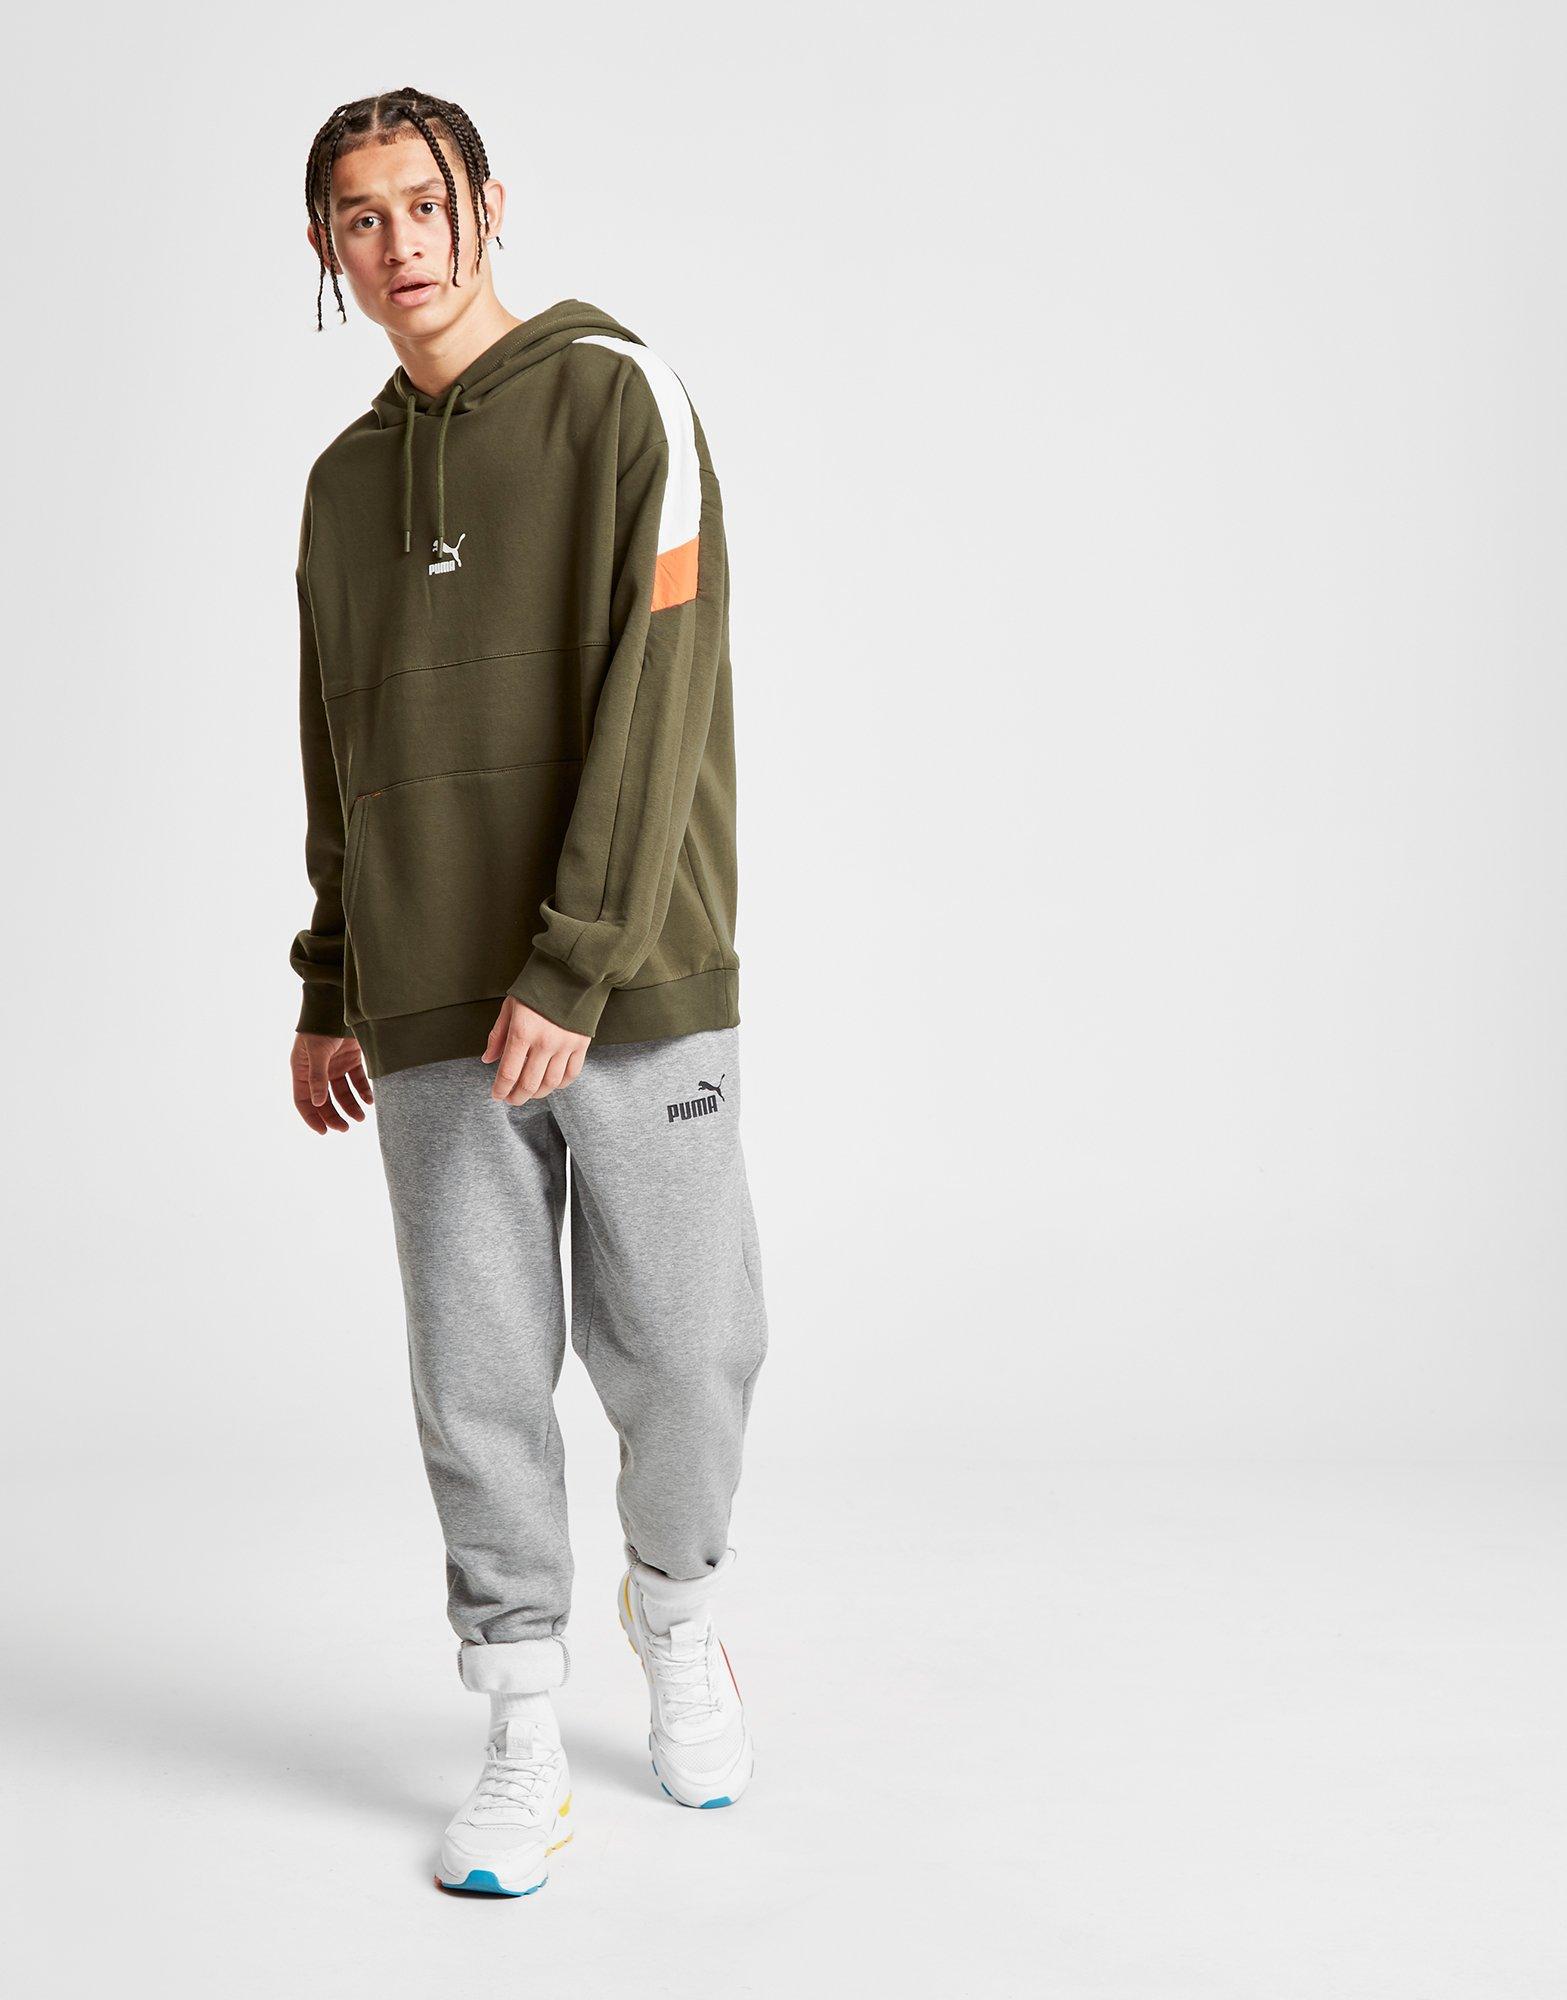 PUMA Cotton Rs Overhead Hoodie in Green 